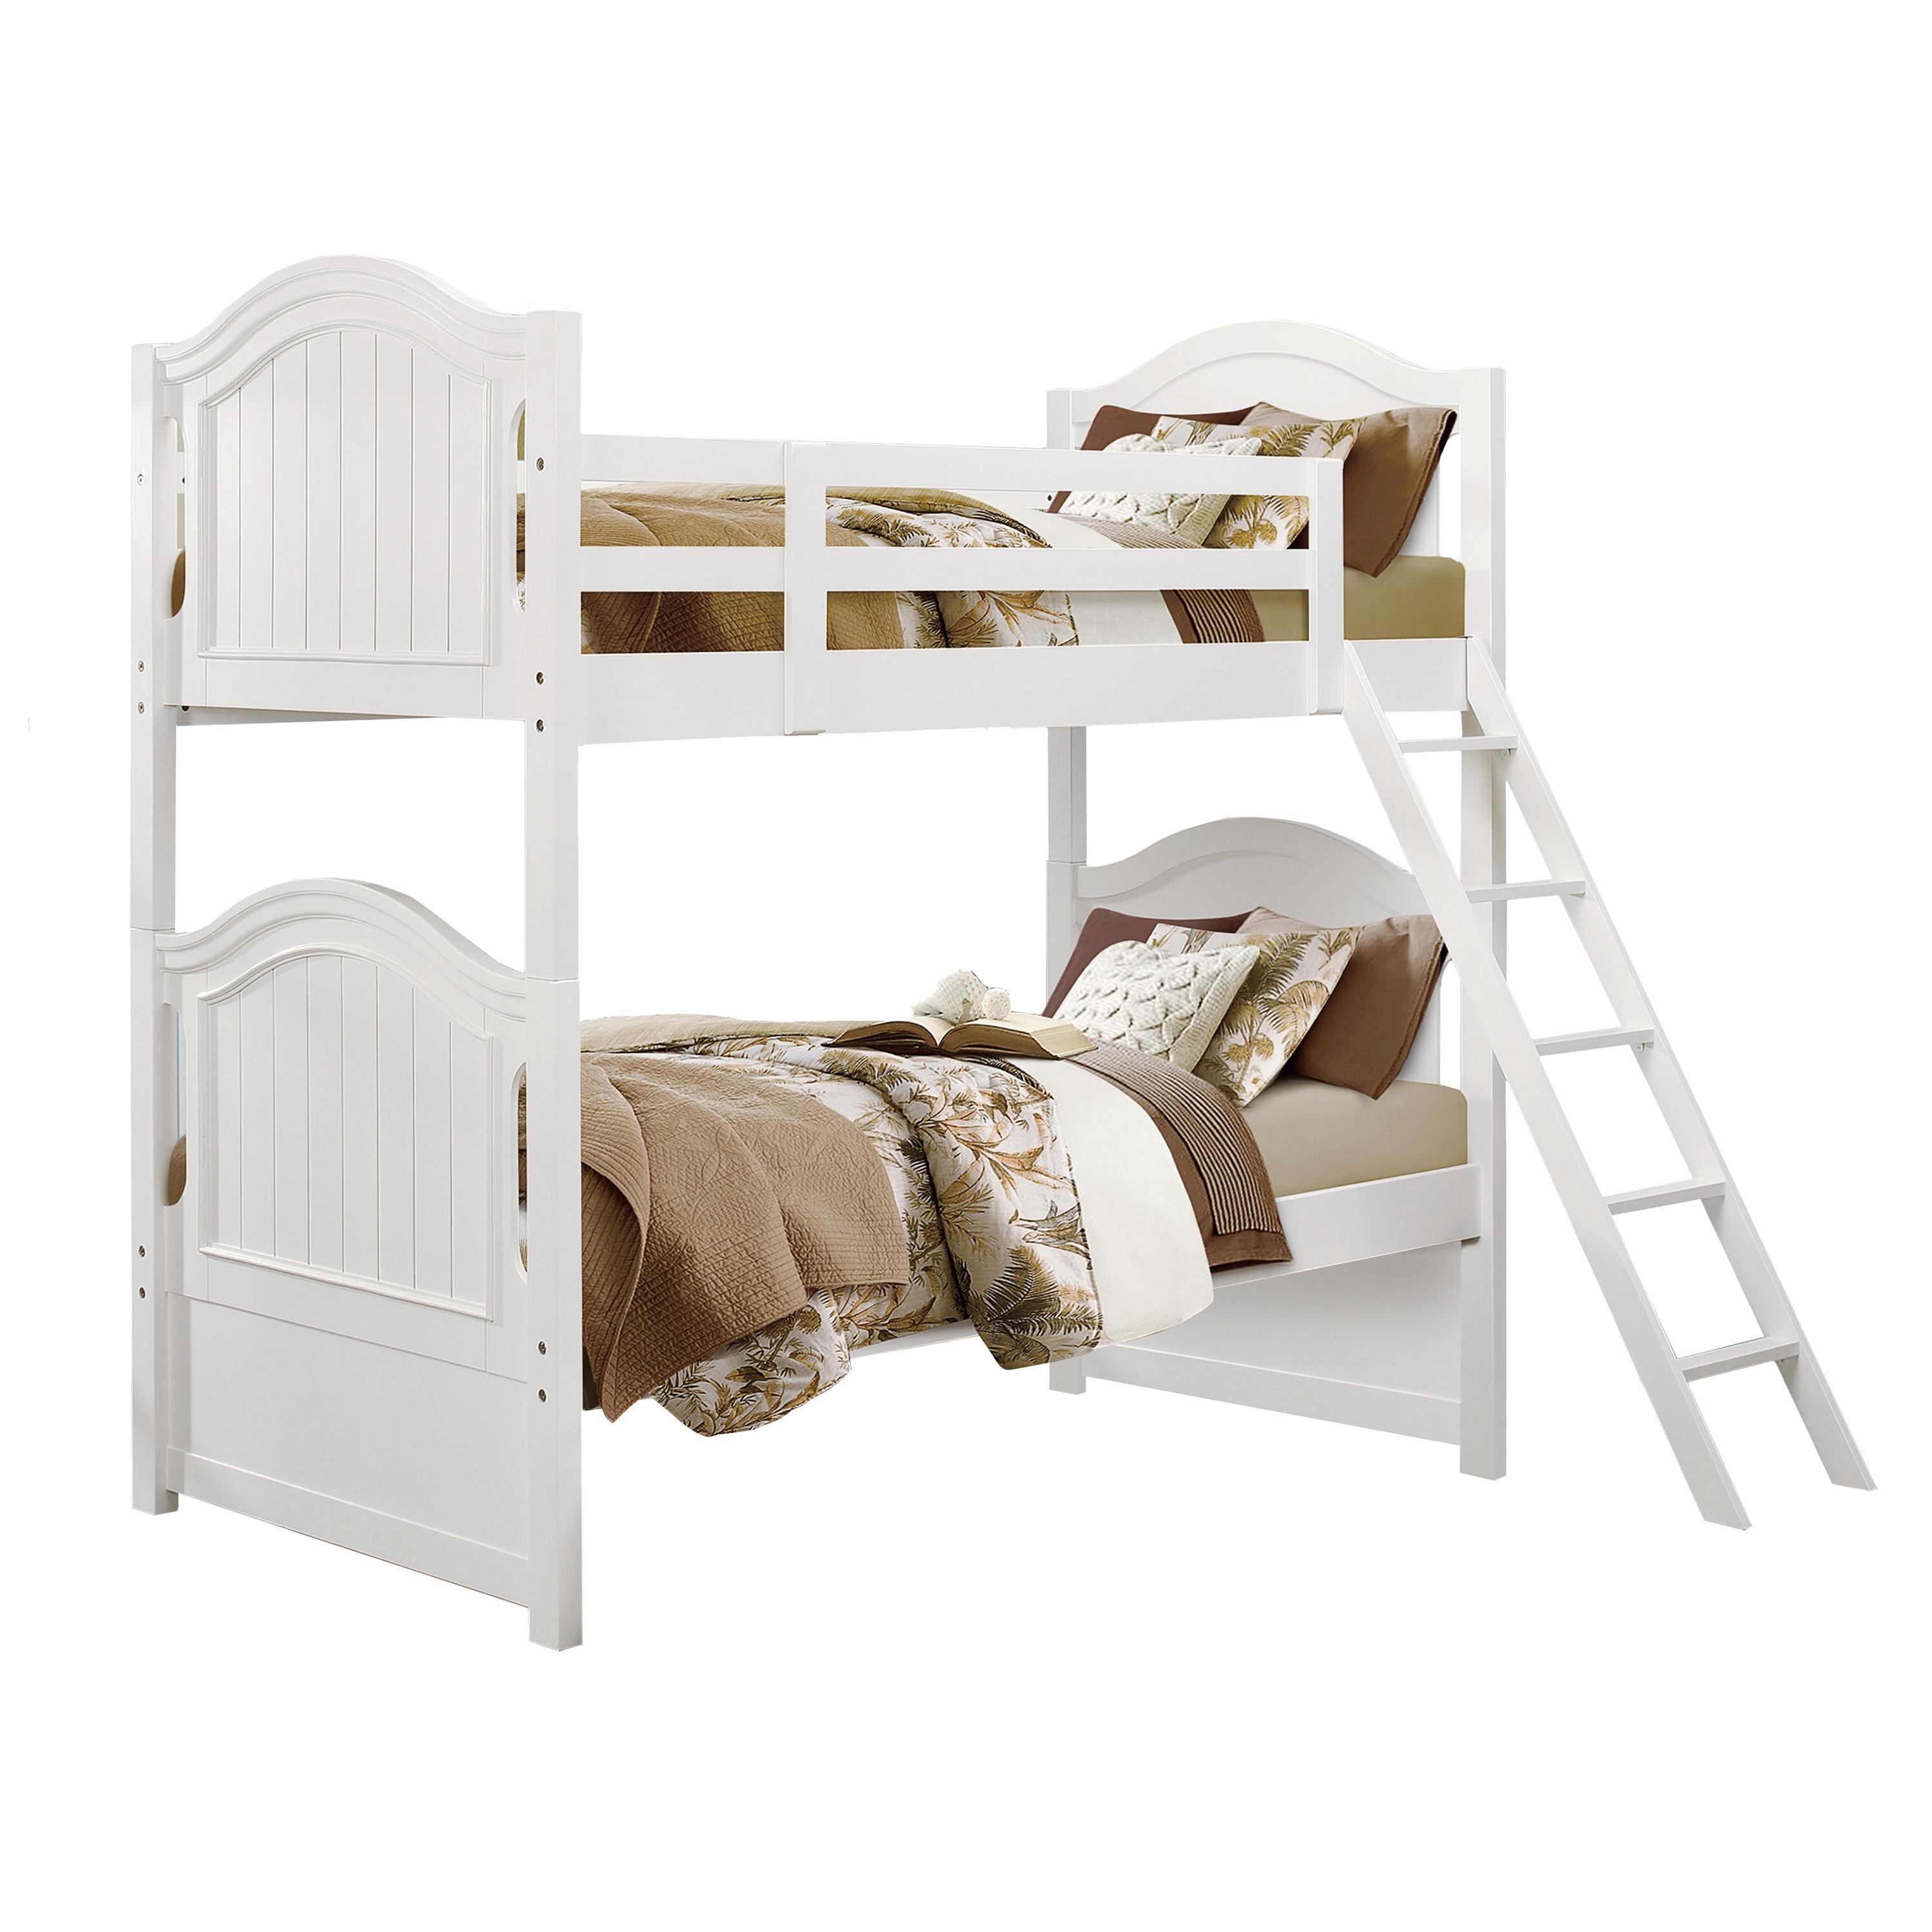 Classic Bunk Bed B1799-1* Clementine B1799-1* in White 